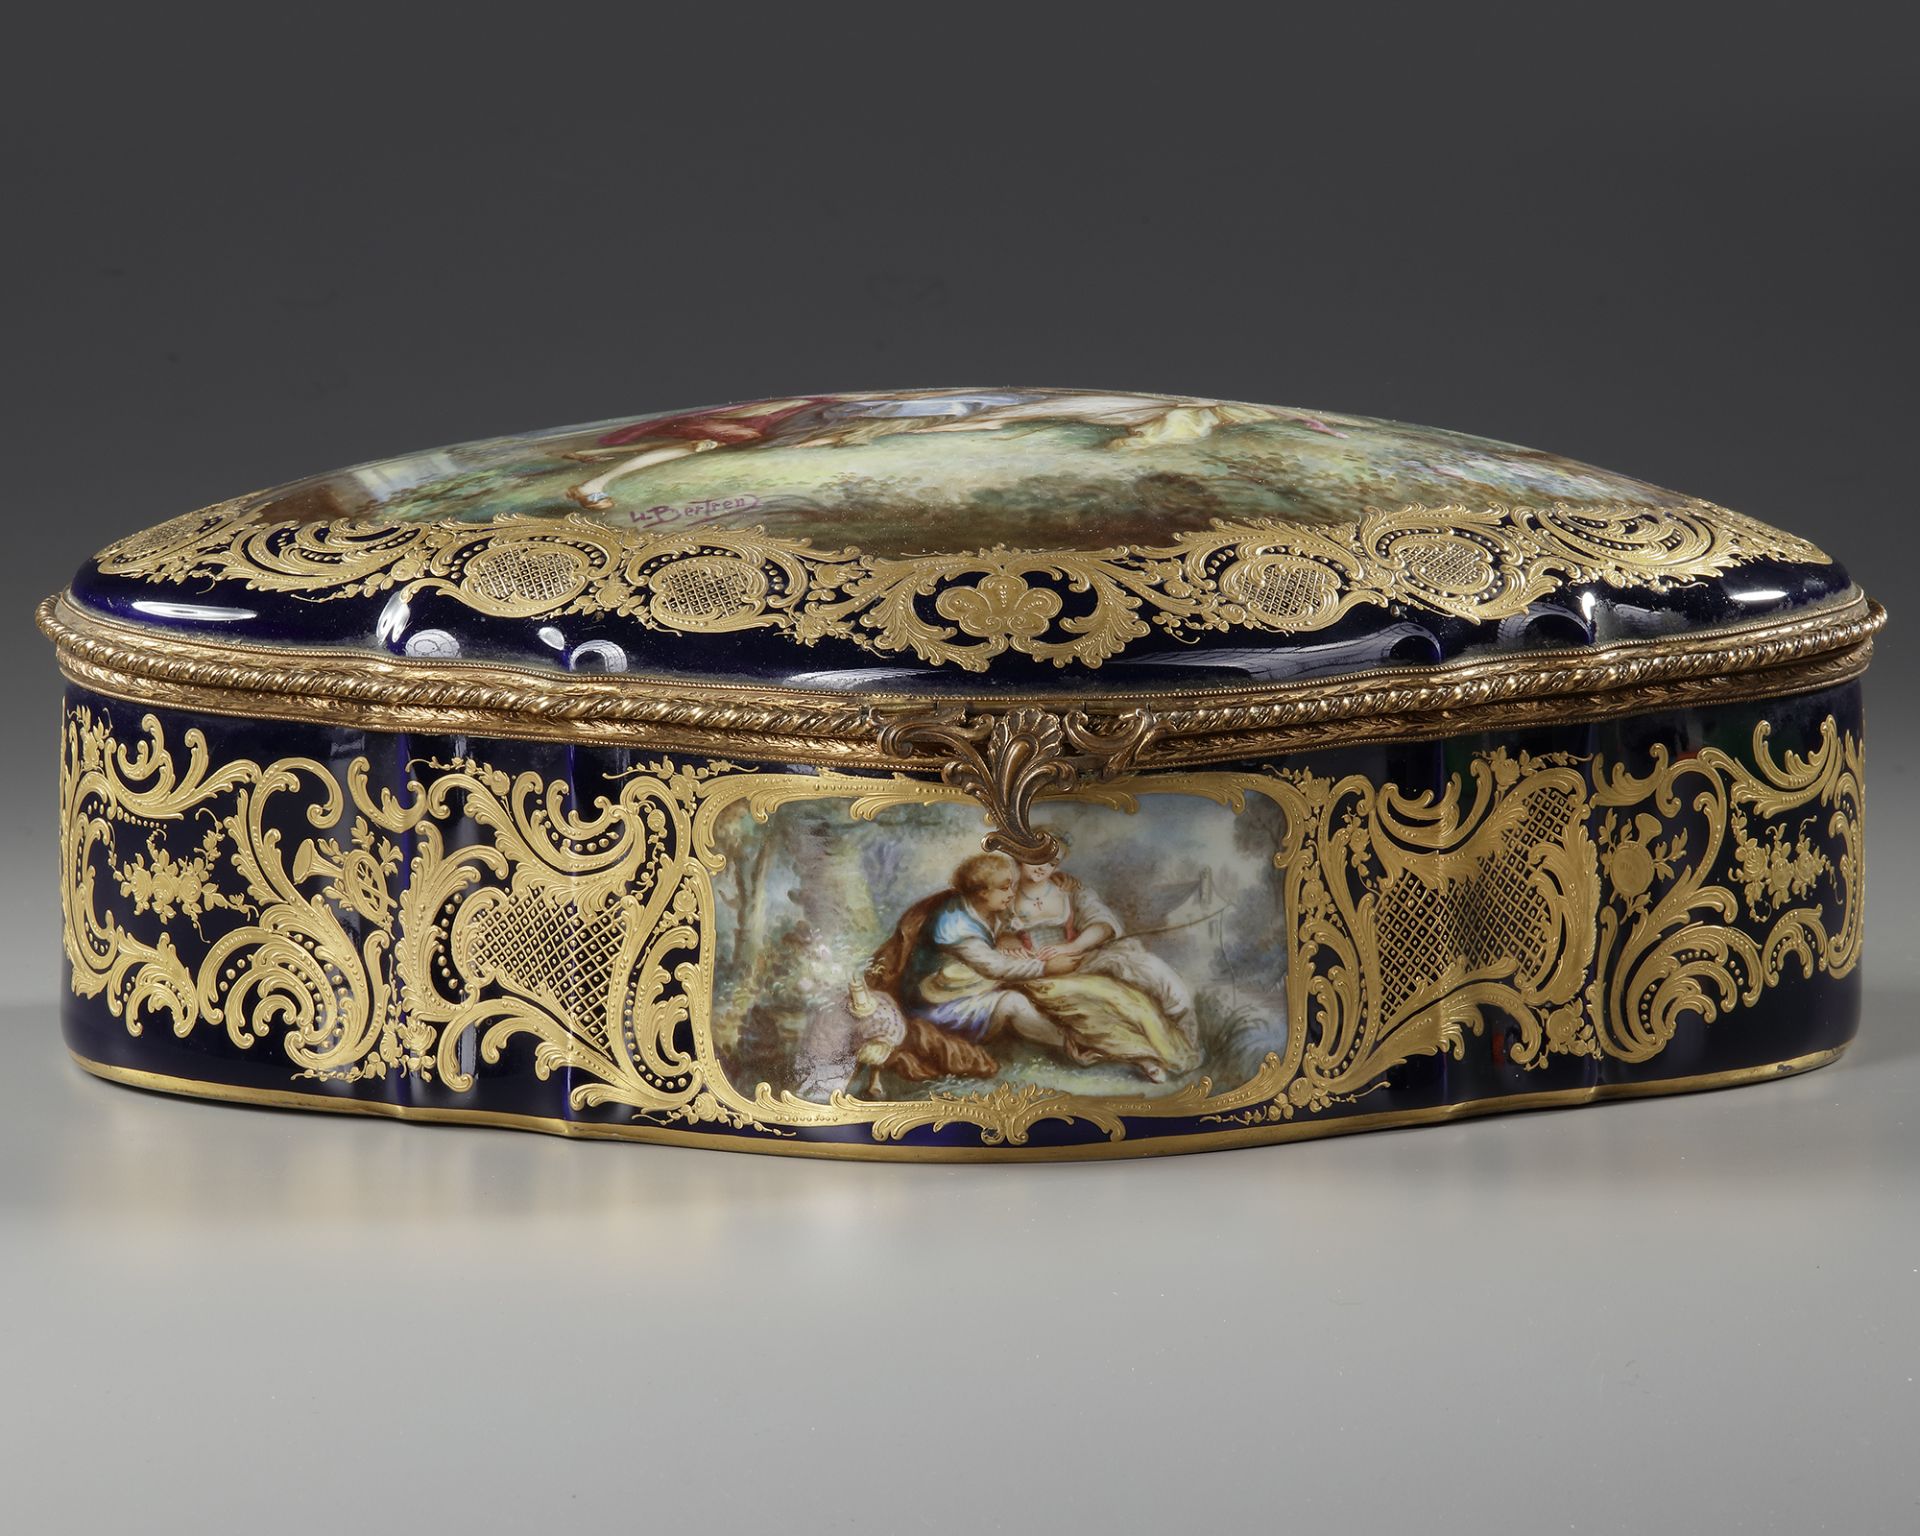 A PORCELAIN JEWELRY BOX, 19TH CENTURY - Image 2 of 5